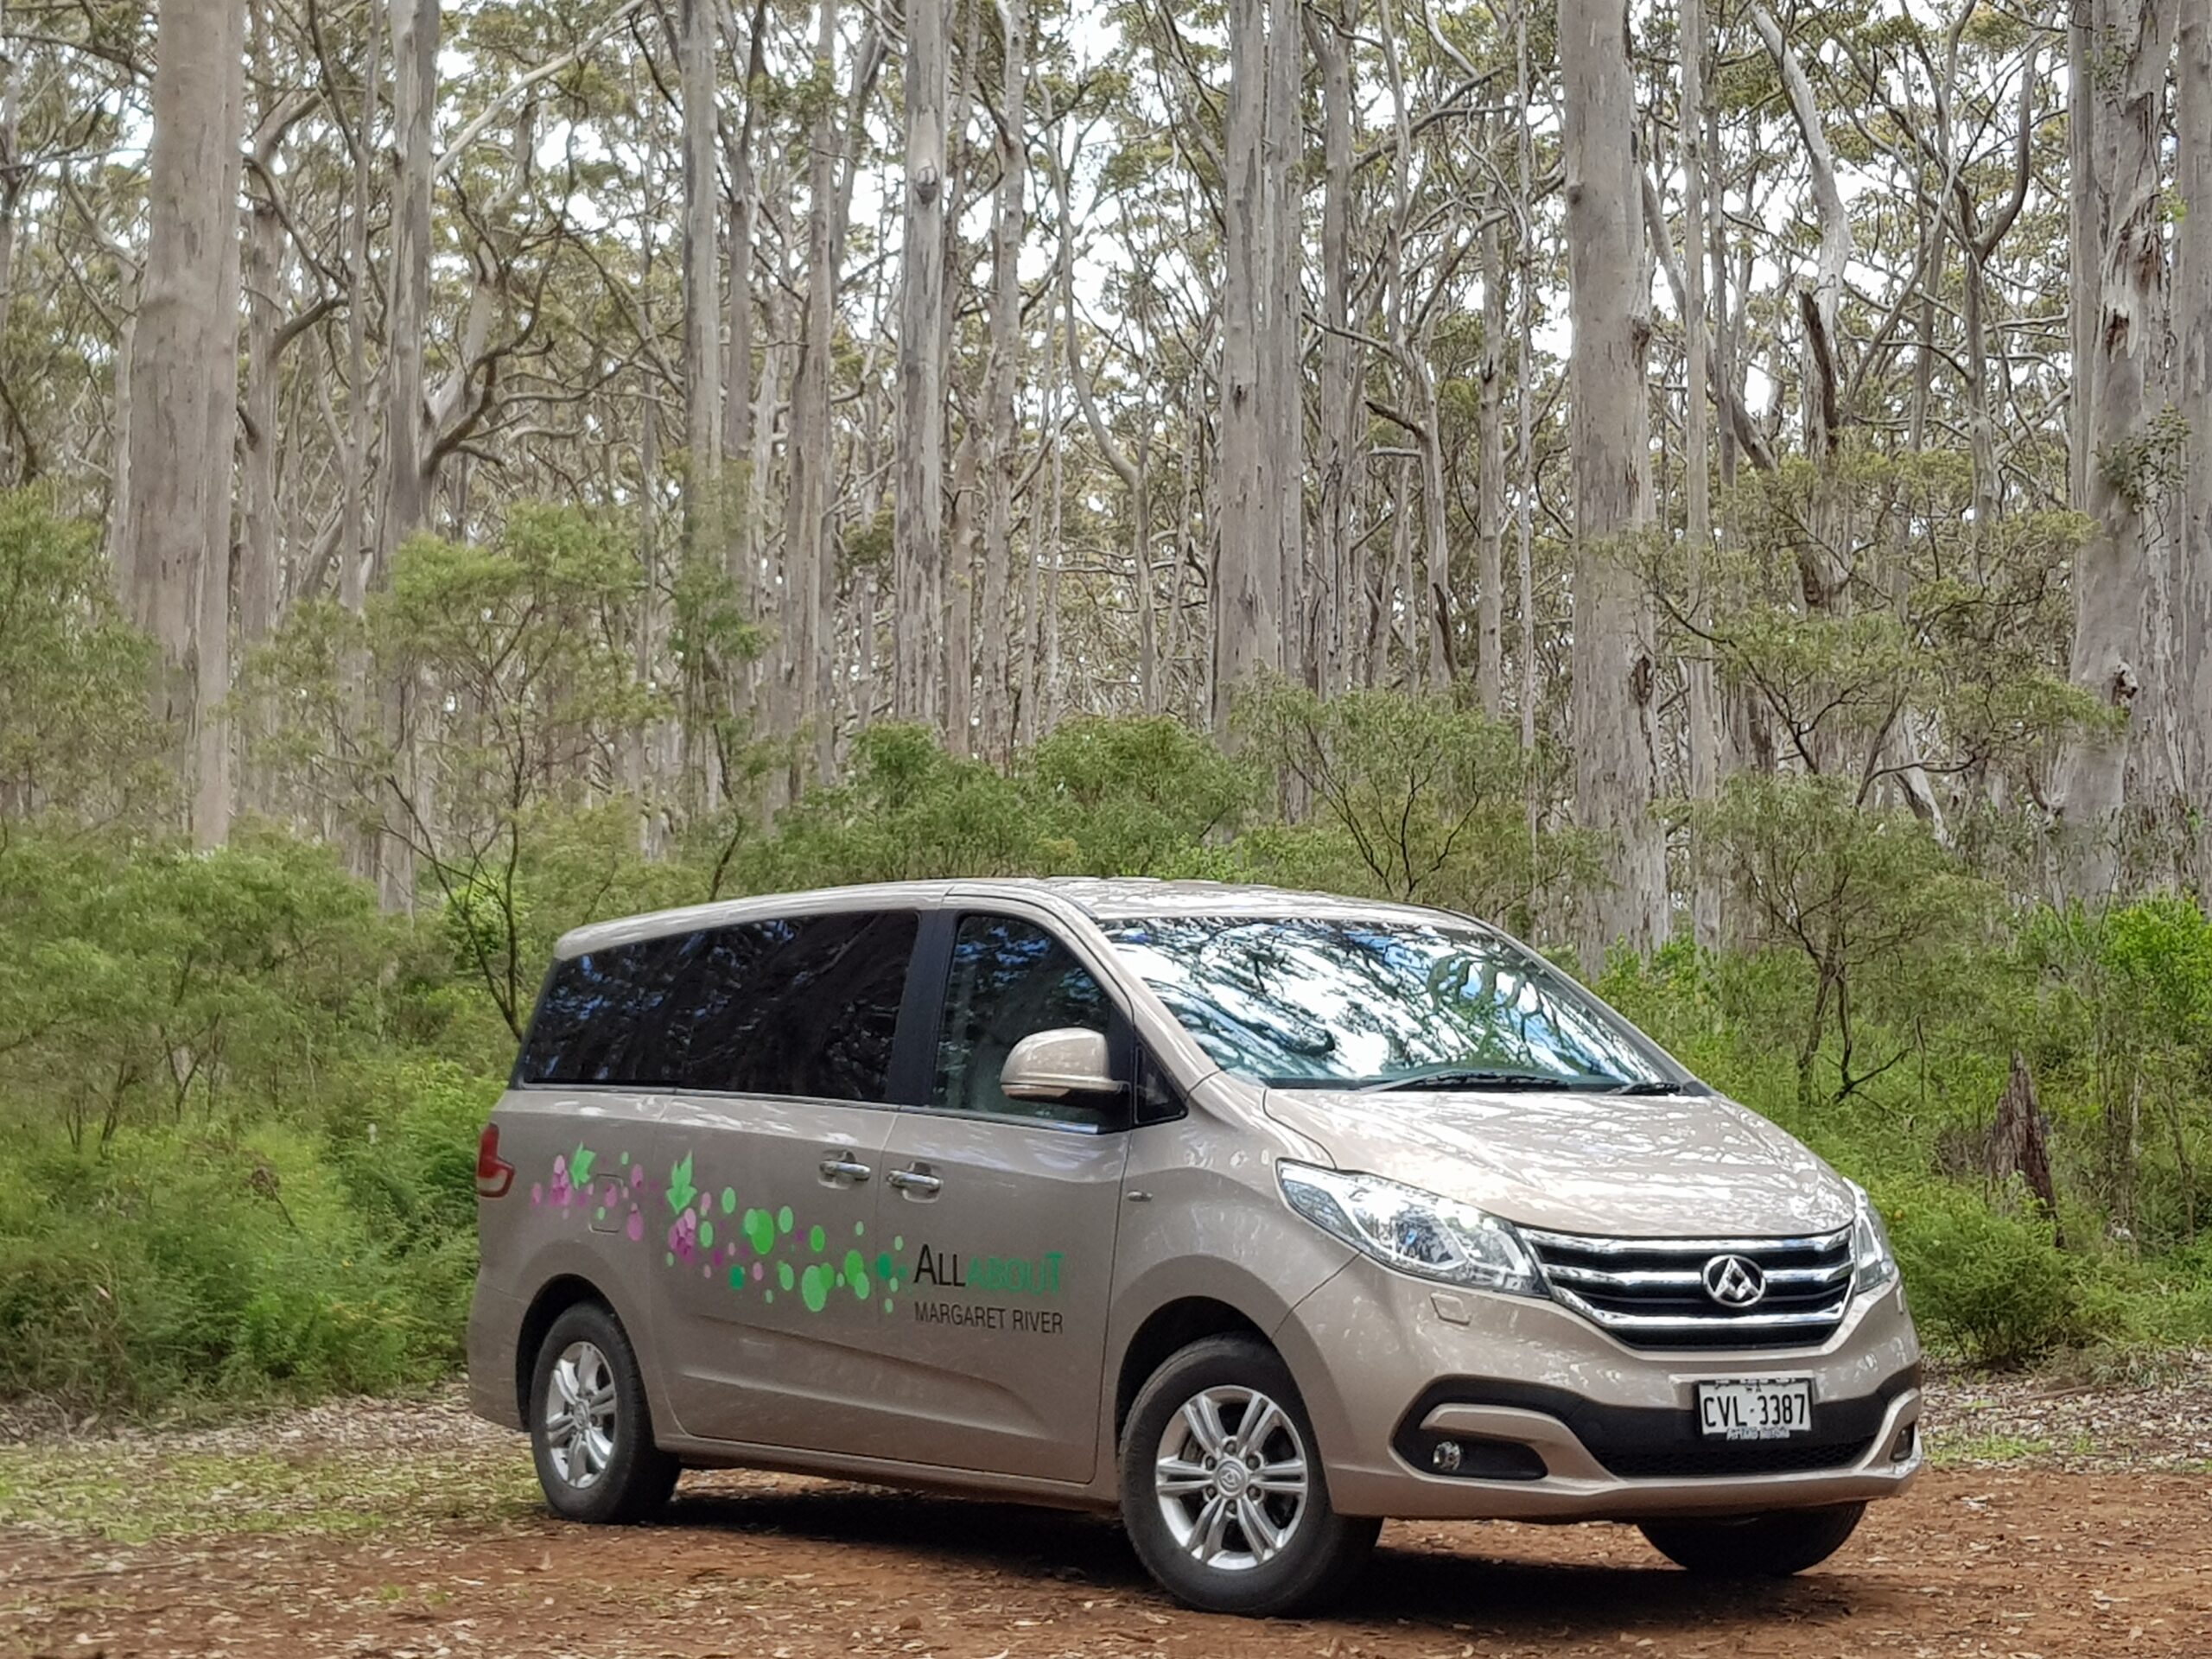 The All About Margaret River Tour: Wine, Coffee, Lunch and Forest